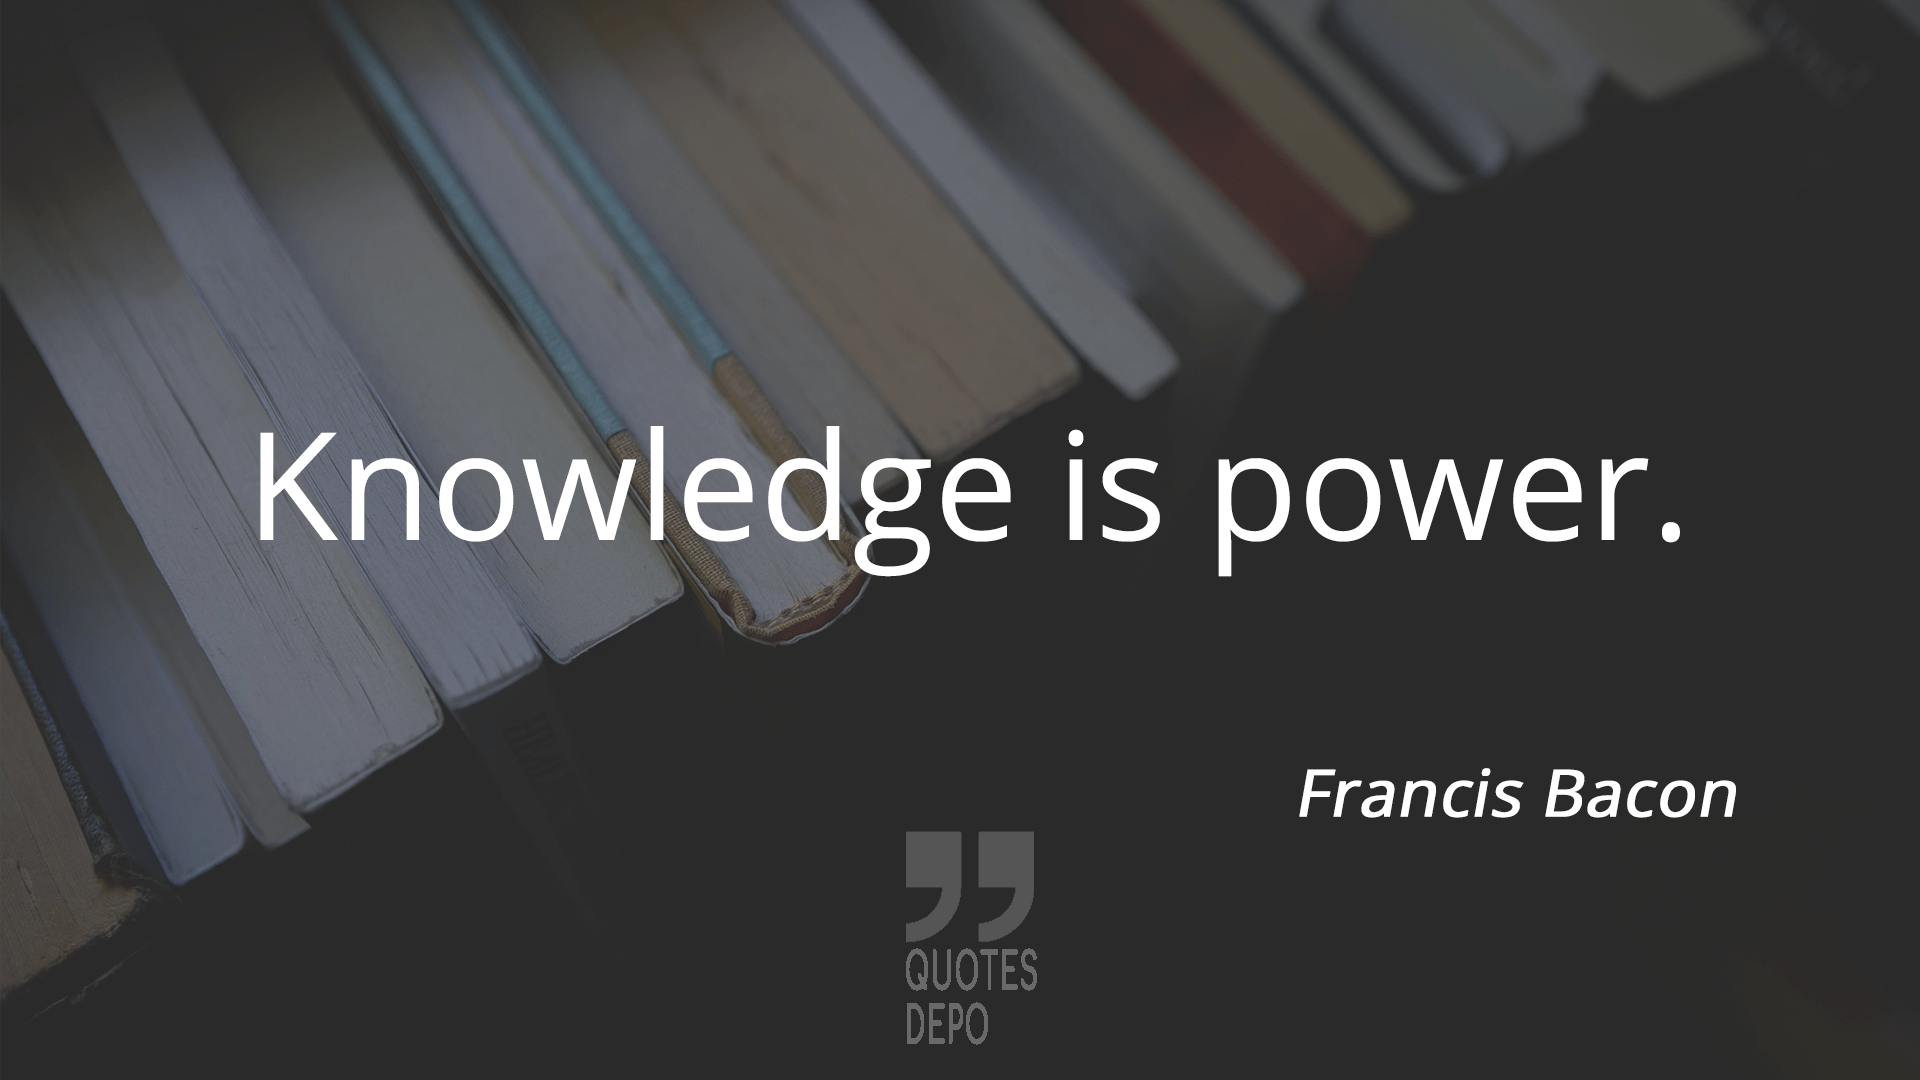 Knowledge Is Power Quotes - Who Said Knowledge Is Power Quotes | Quotes Depo